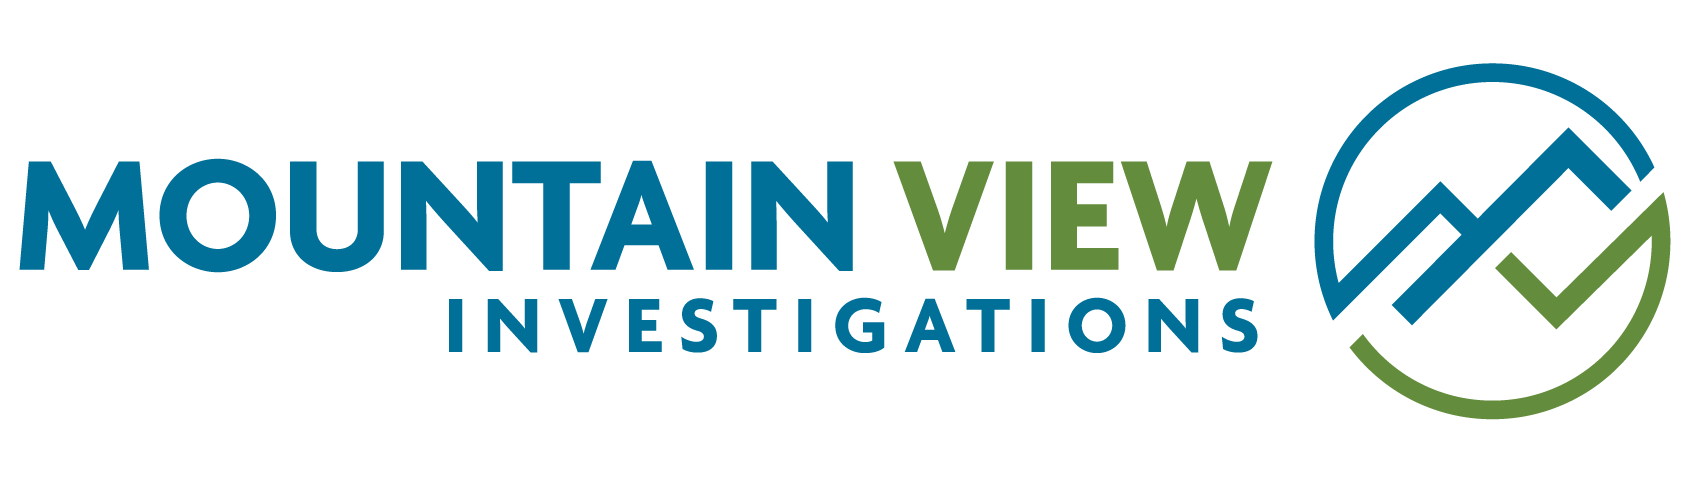 Mountain View Investigations